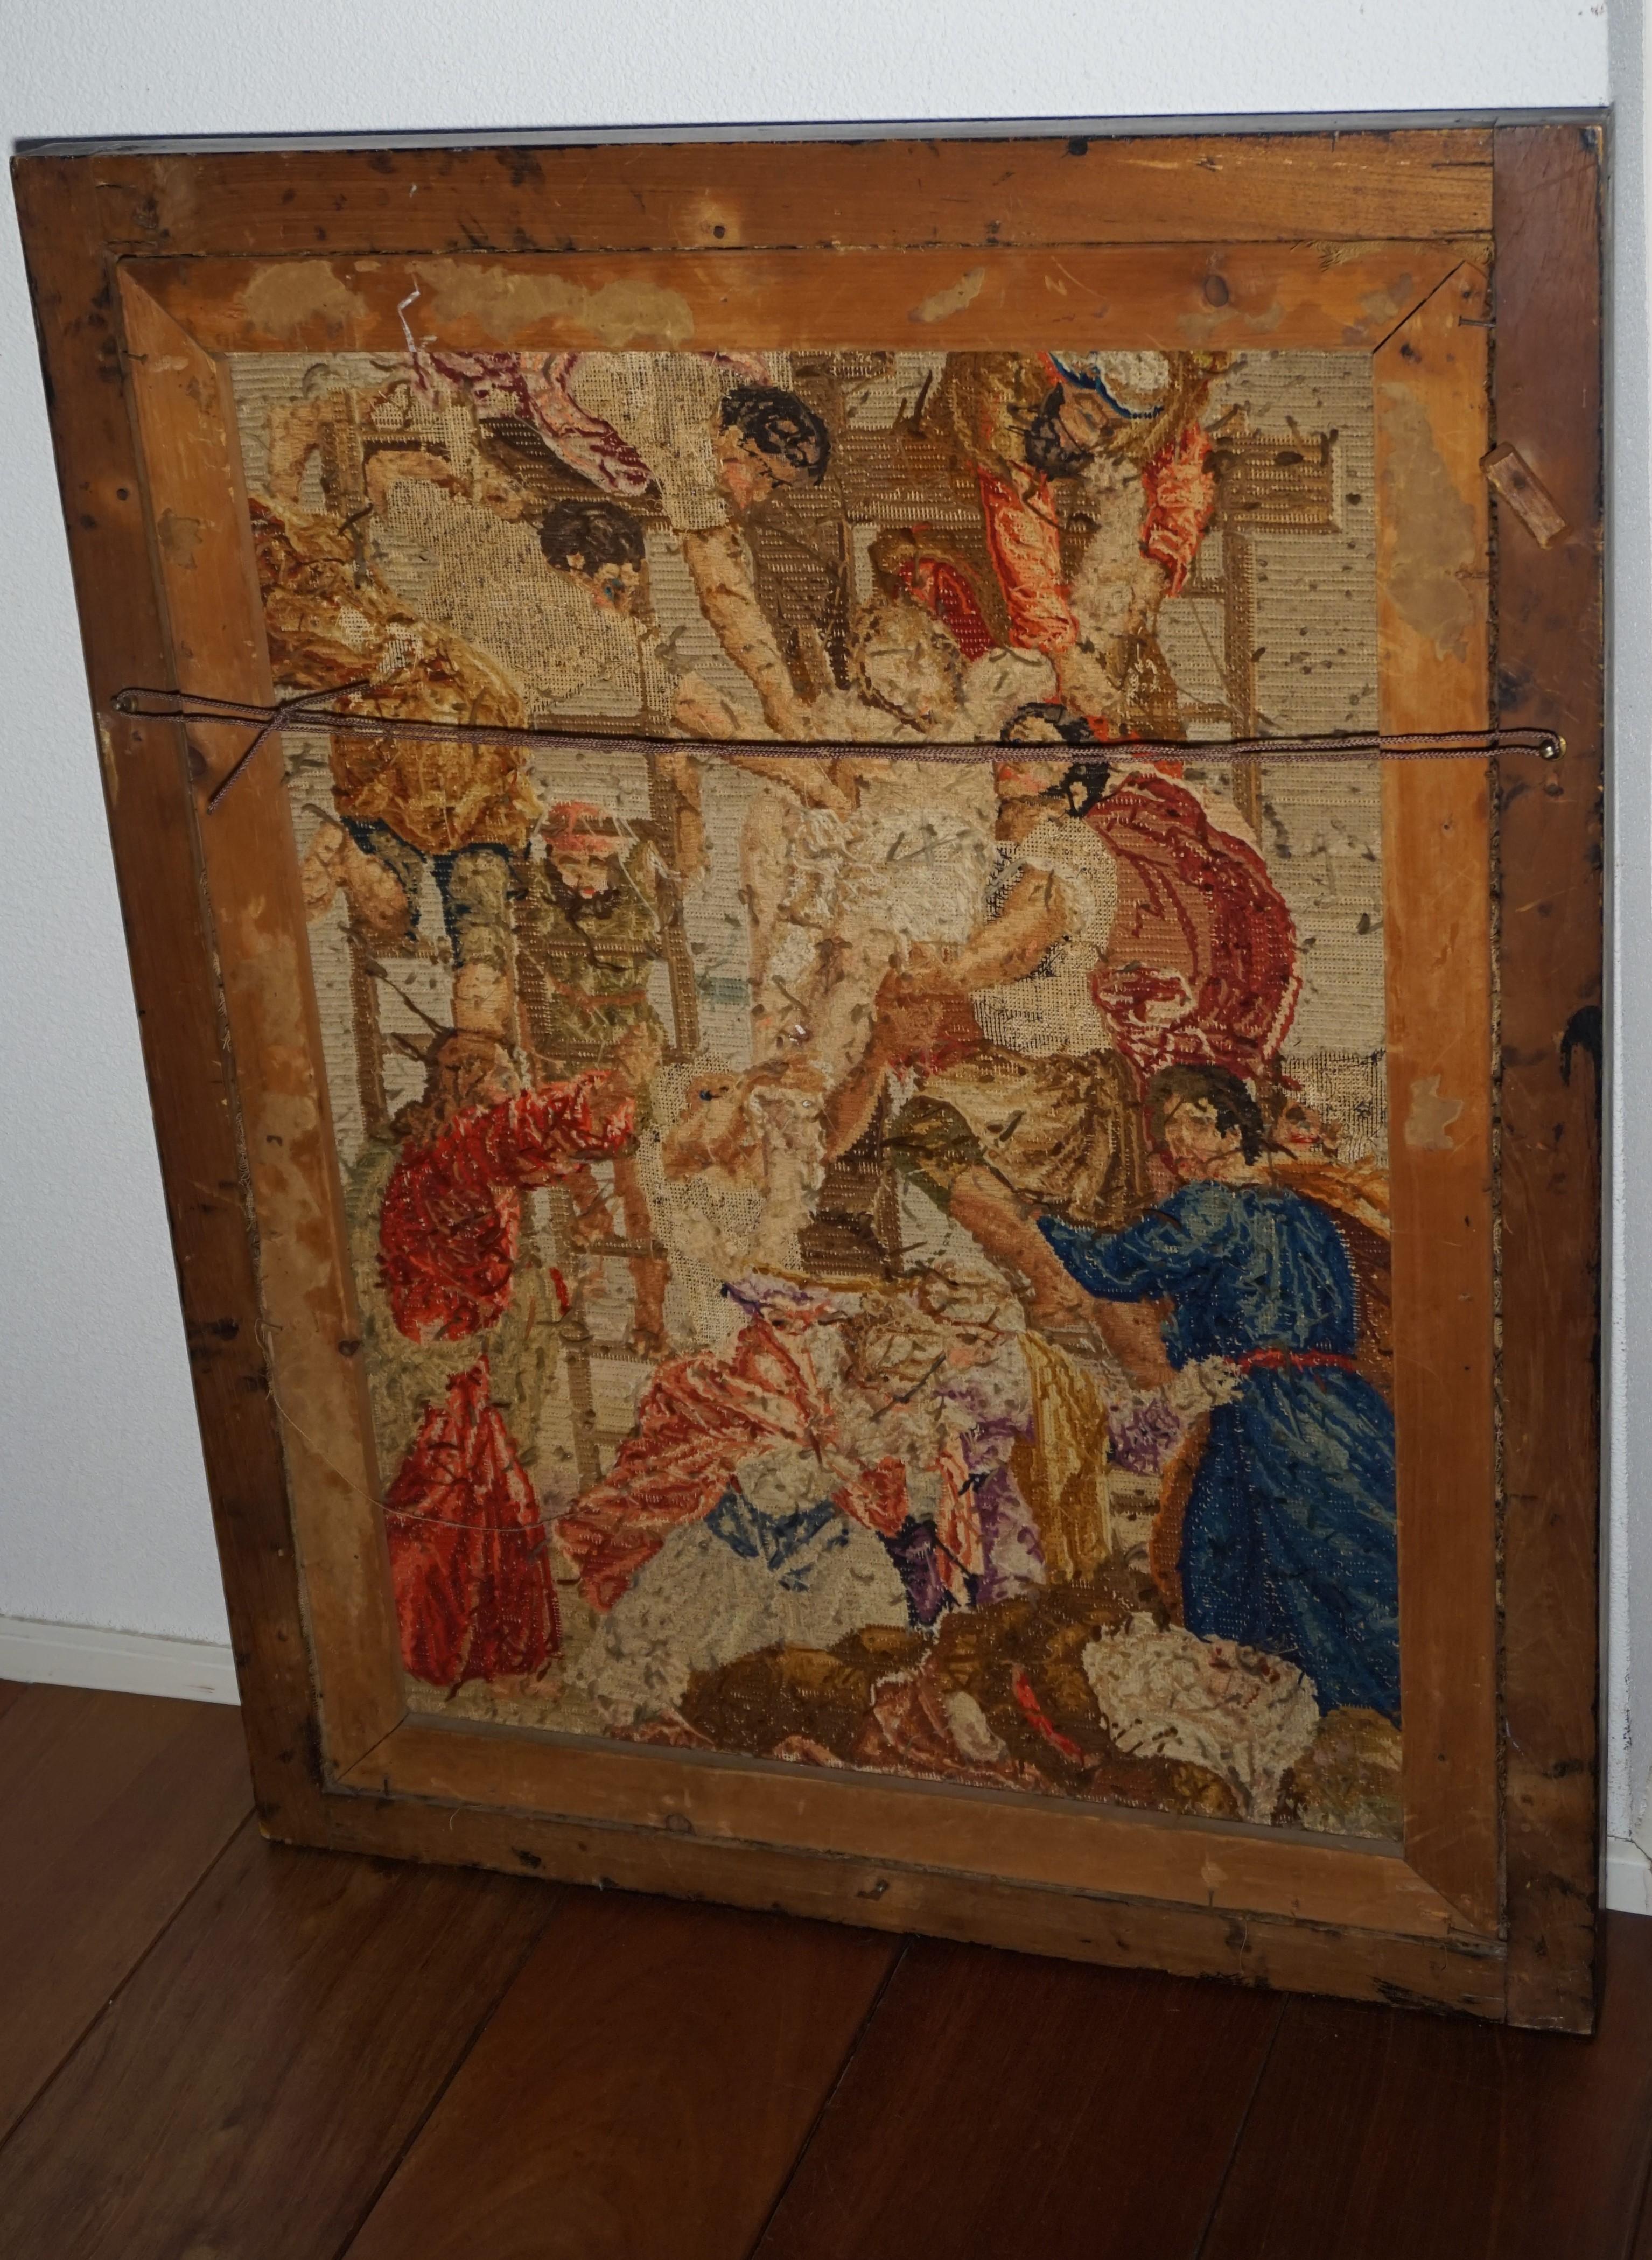 Ebonized Stunning Mid-1800s Handcrafted Embroidery of Jesus' Descent from the Cross For Sale